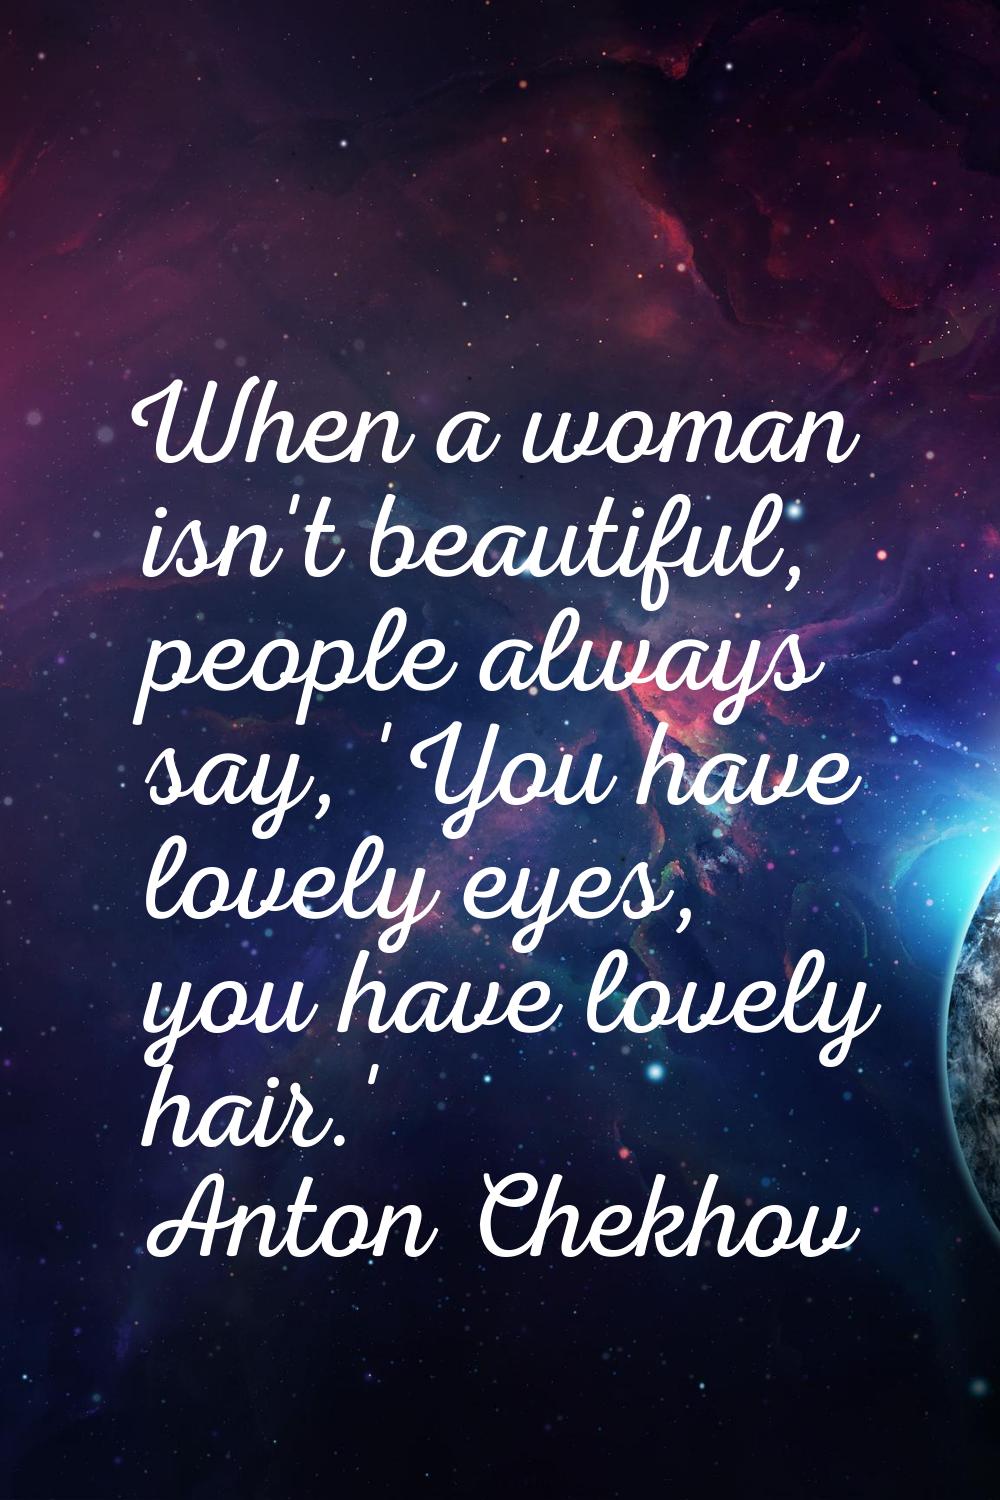 When a woman isn't beautiful, people always say, 'You have lovely eyes, you have lovely hair.'